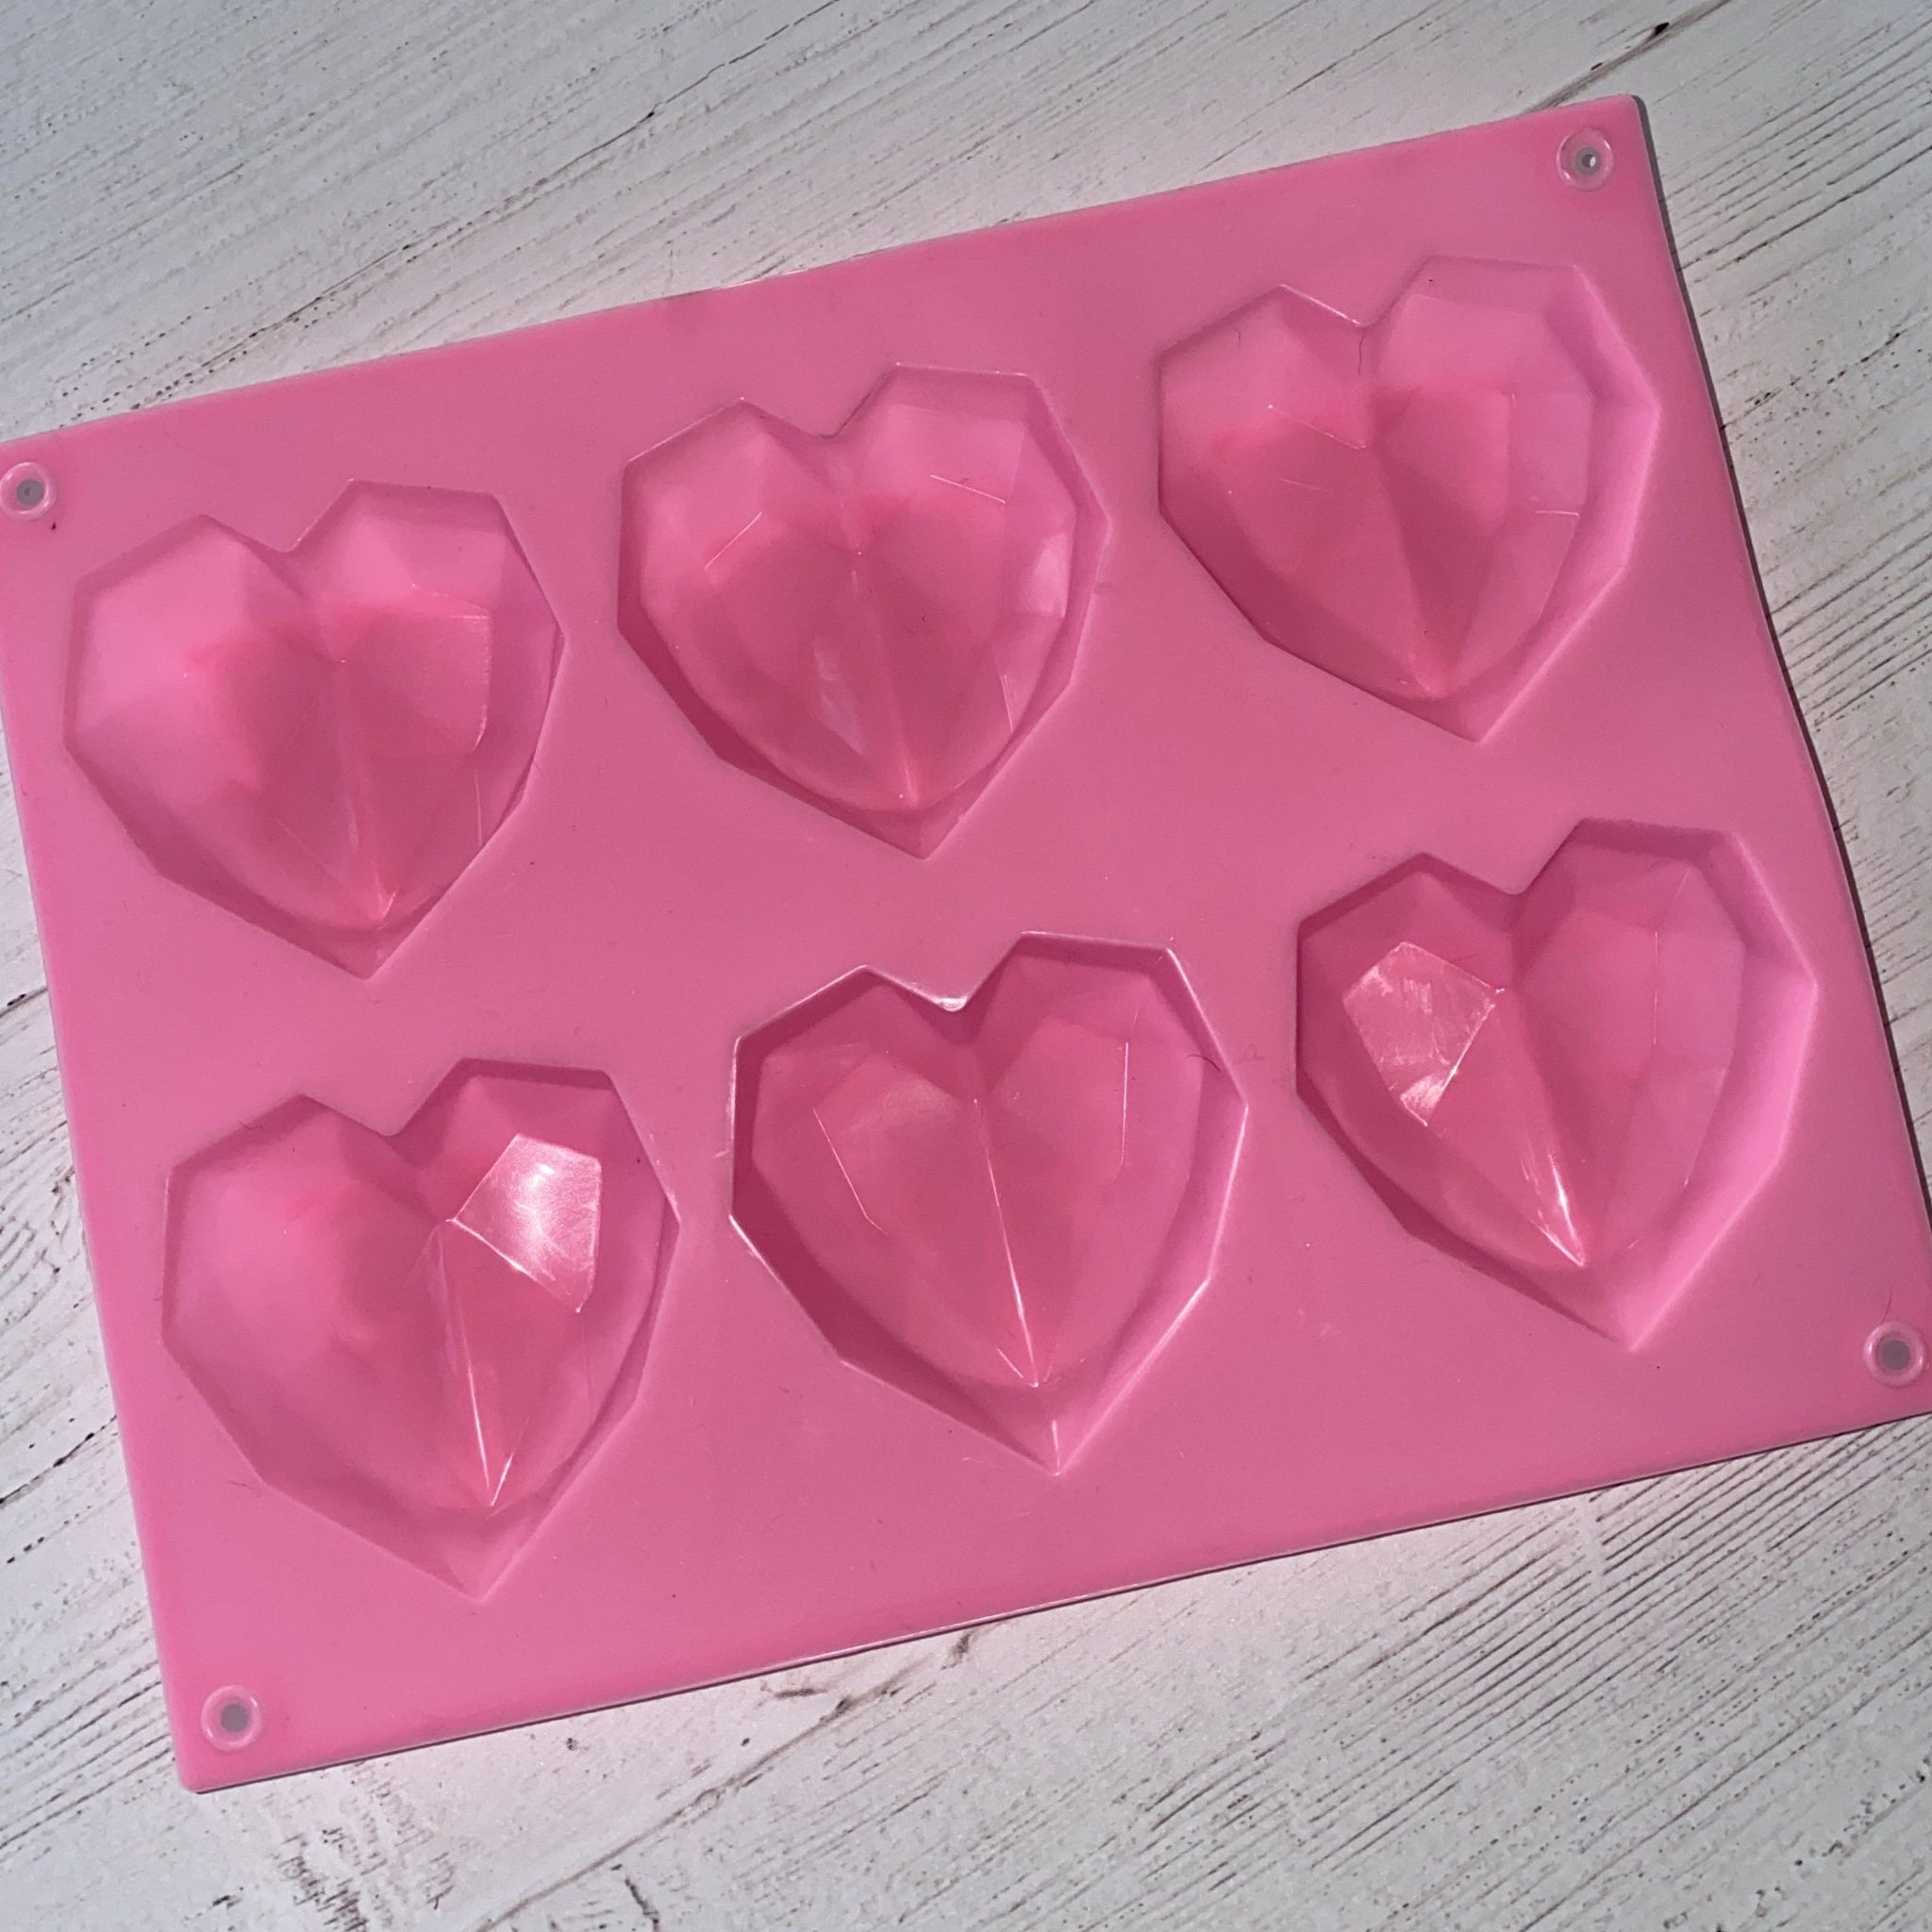 6-Cavity Heart Shaped Silicone Mold for Chocolate, Mousse, Hot Chocolate  Cocoa Bomb